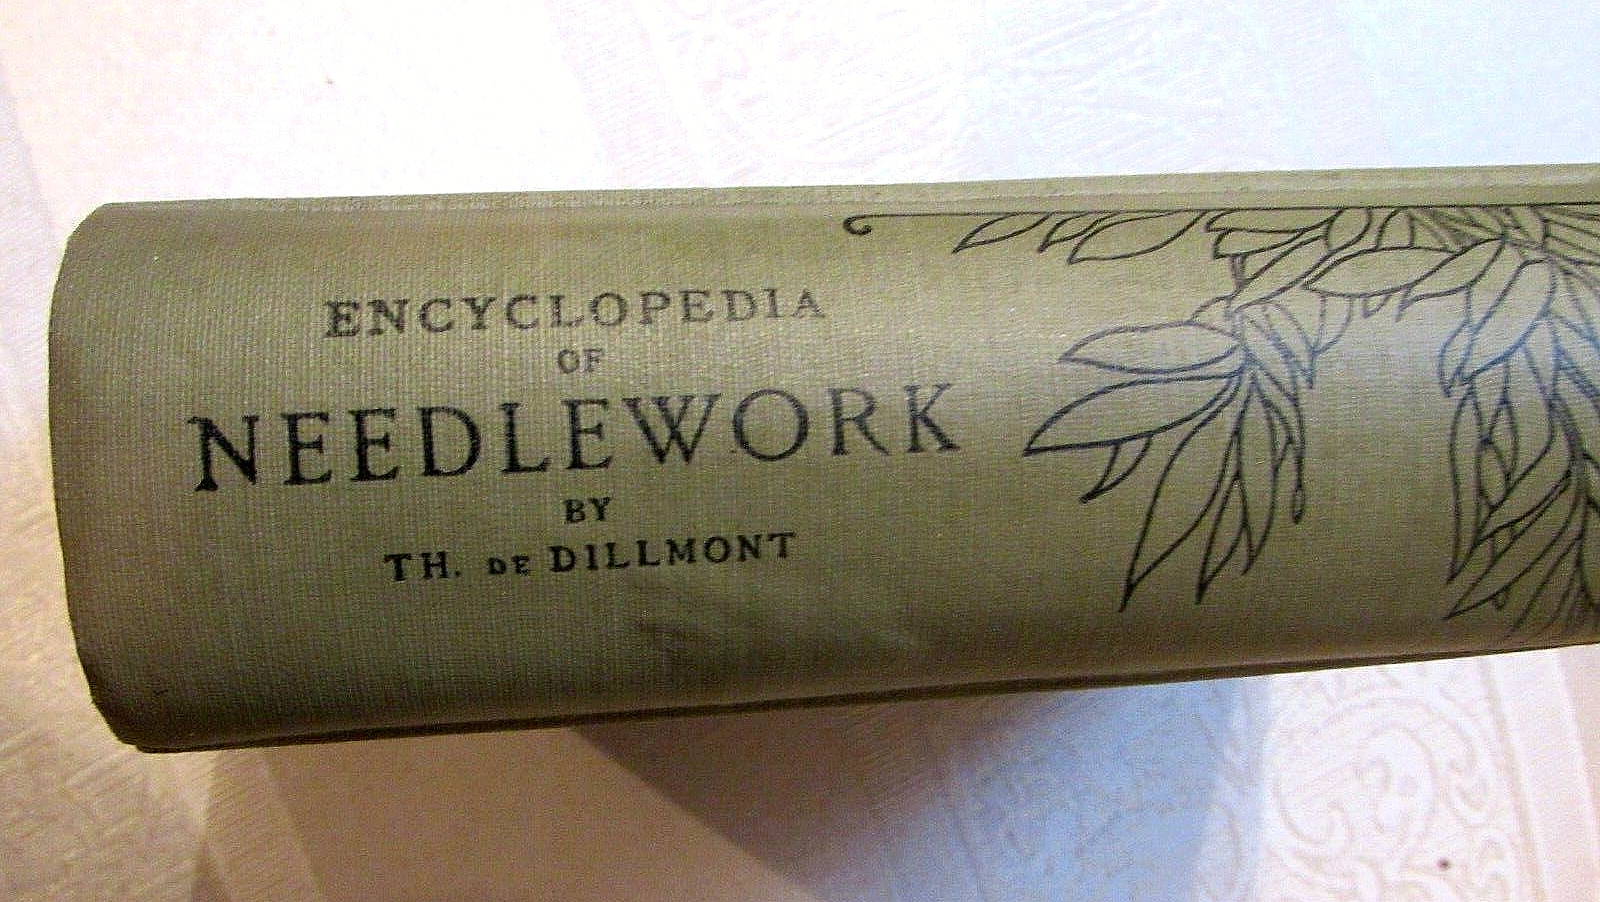 ANTIQUE Complete ENCYLOPEDIA of NEEDLEWORK, Illustrated   Simplest to Specialty